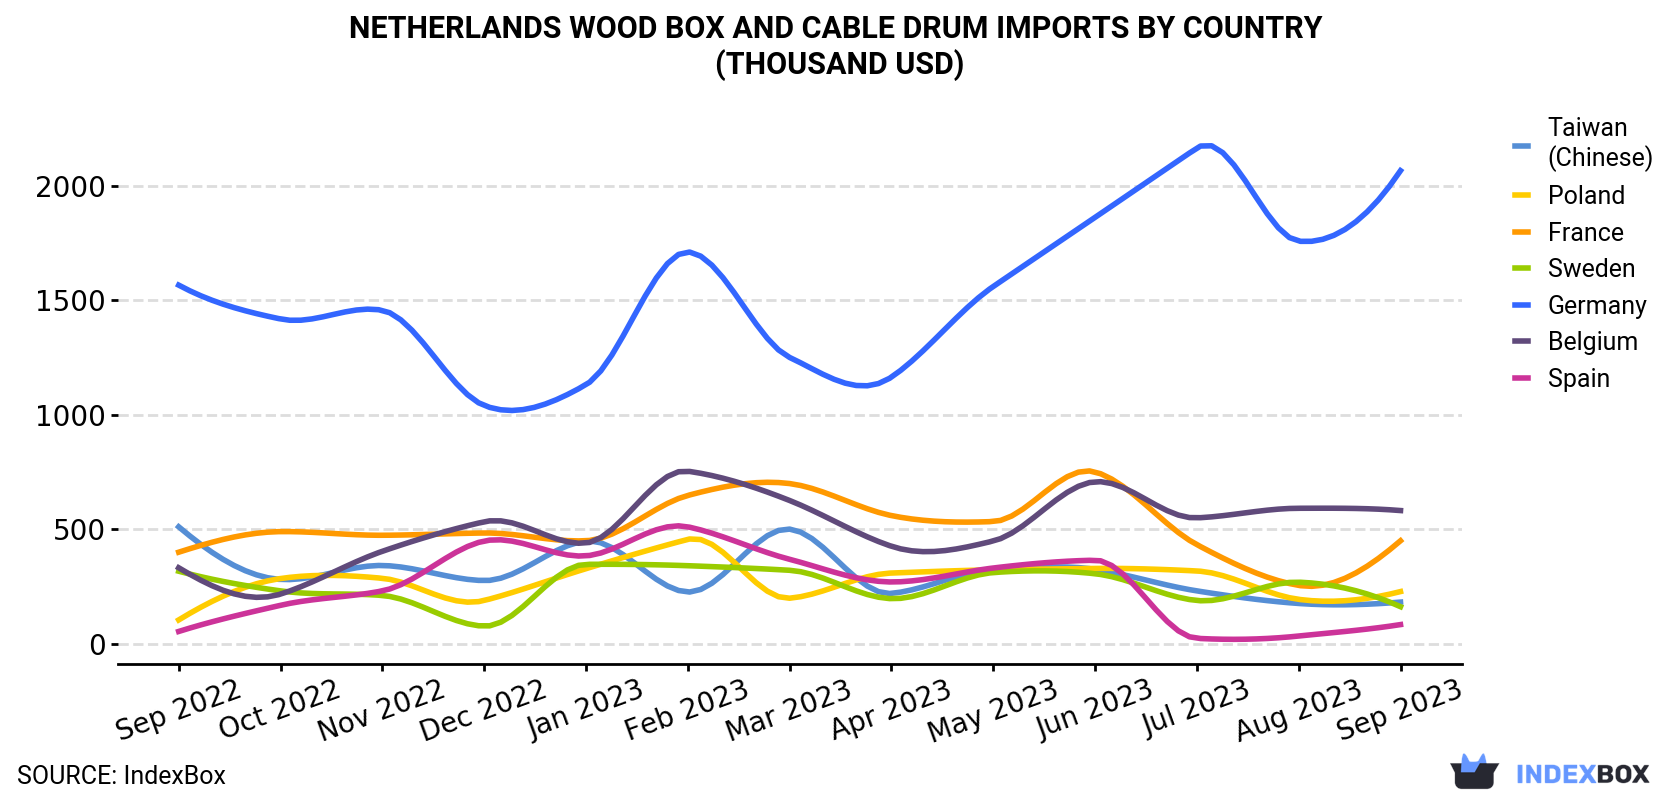 Netherlands Wood Box and Cable Drum Imports By Country (Thousand USD)